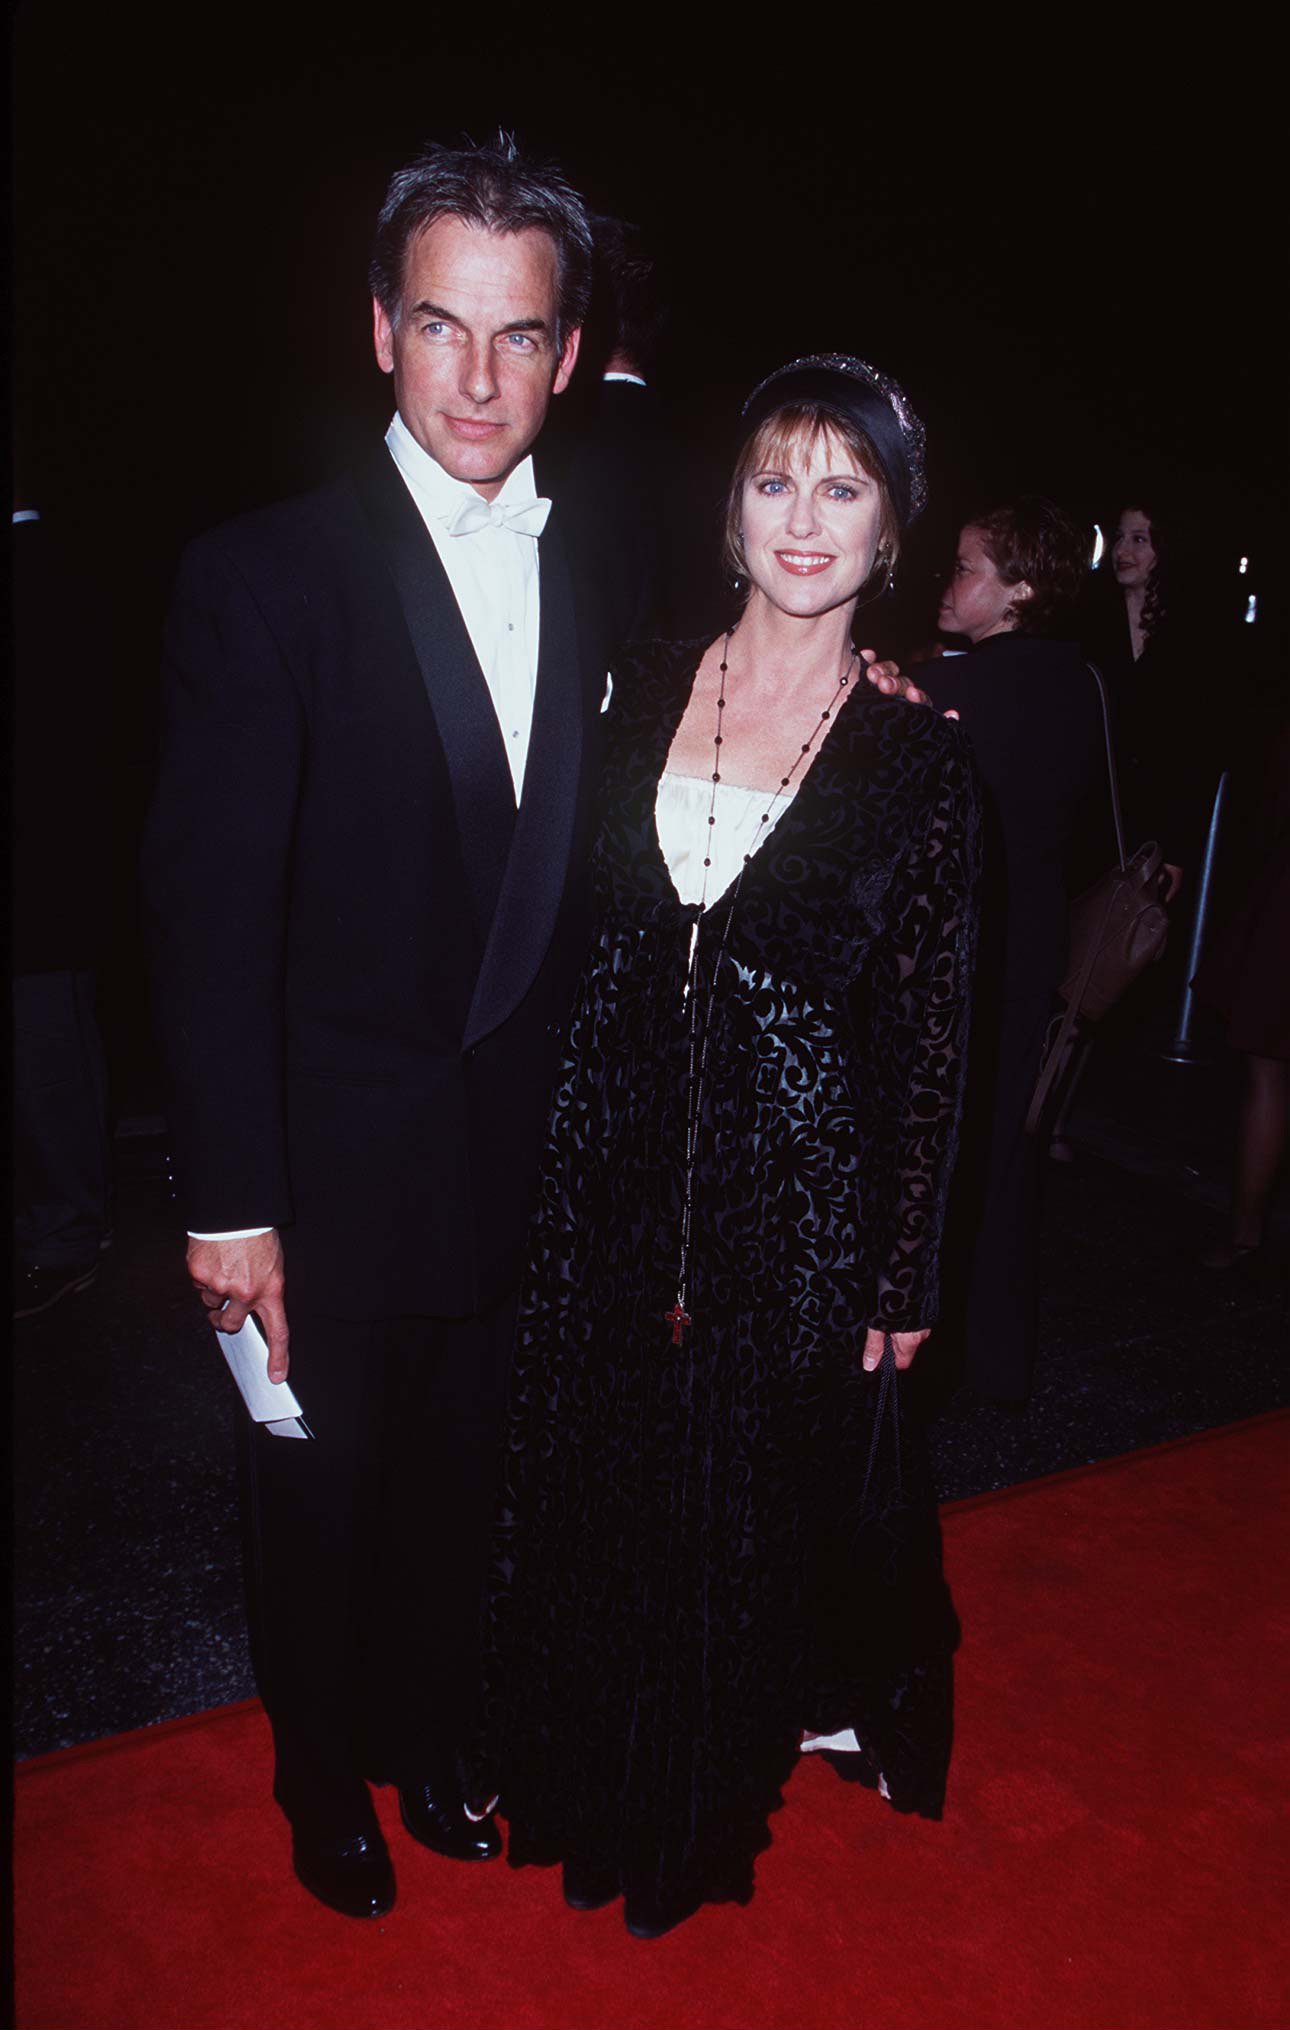 Mark Harmon & Pam Dawber during The 18th Annual Cable ACE Awards at Wiltern Theatre in Los Angeles, California, United States. | Source: Getty Images